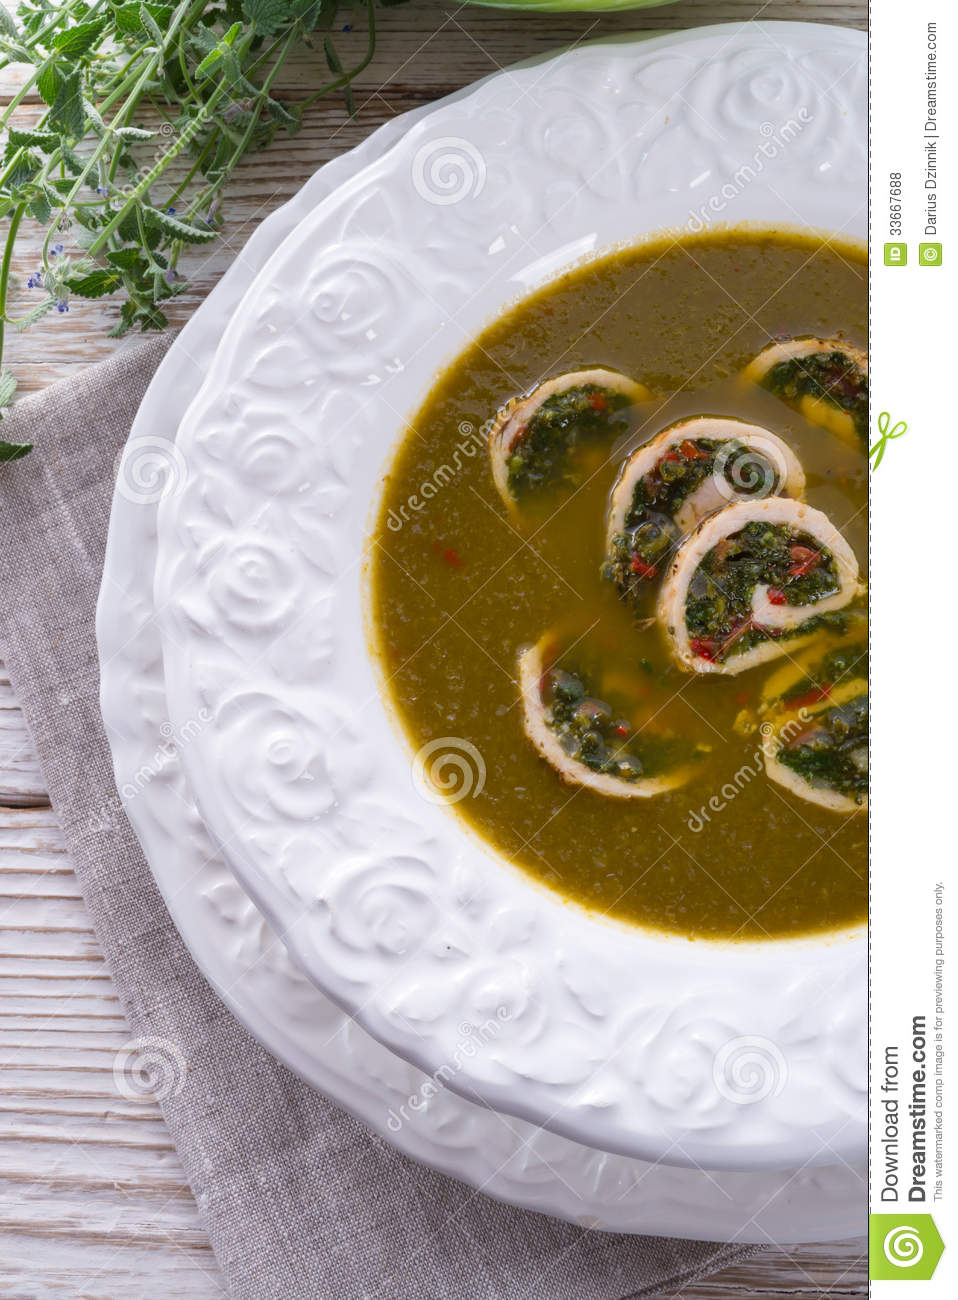 Cabbage Soup With Meat Rolls Royalty Free Stock Photos   Image